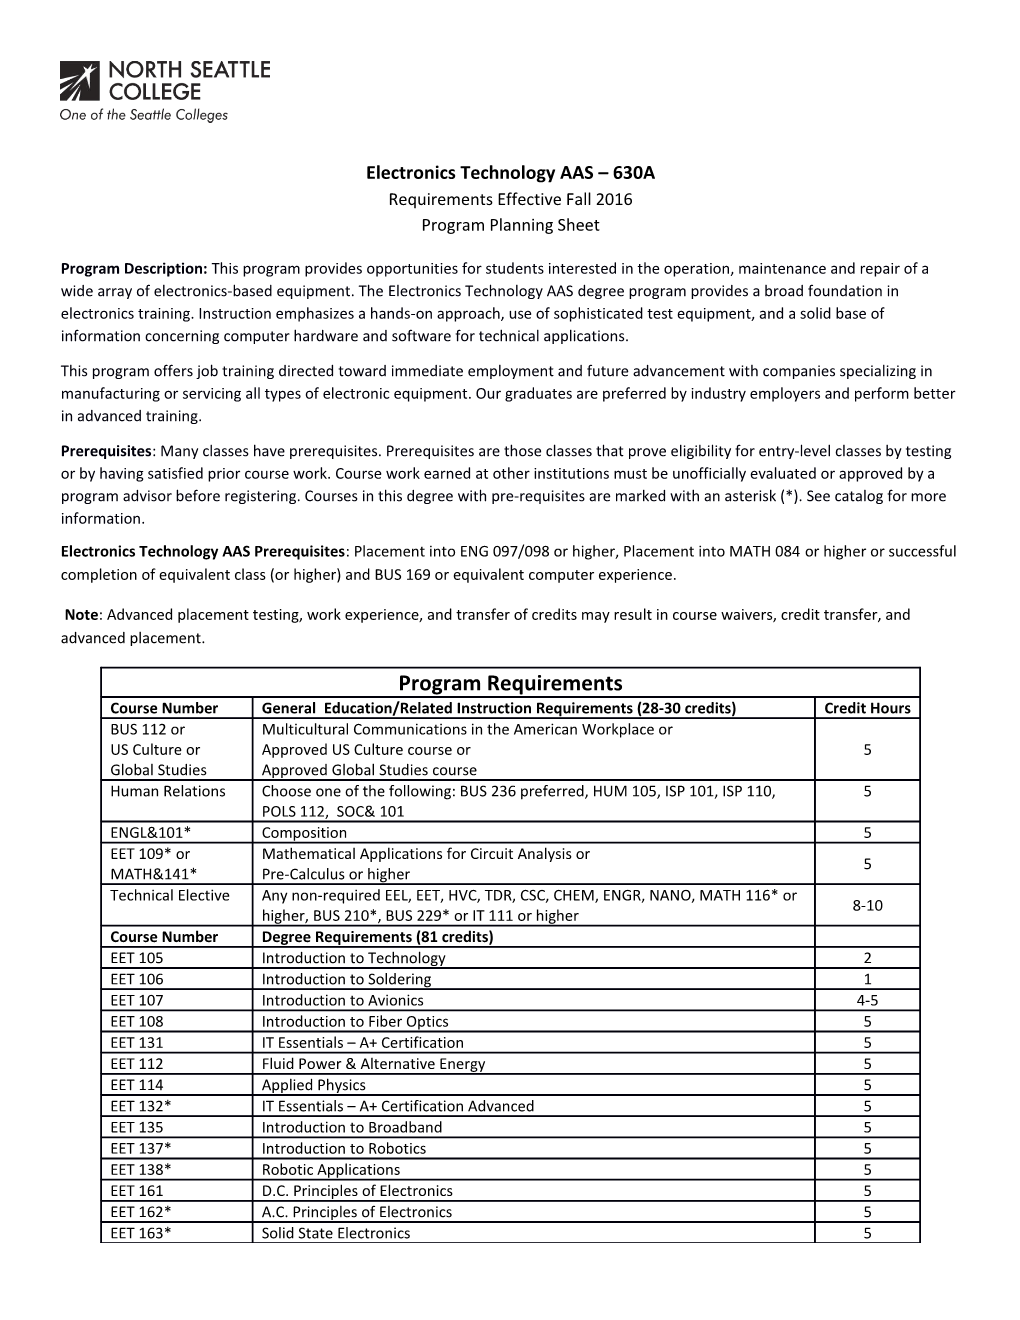 Electronics Technology AAS 630A Requirements Effective Fall 2016 Program Planning Sheet